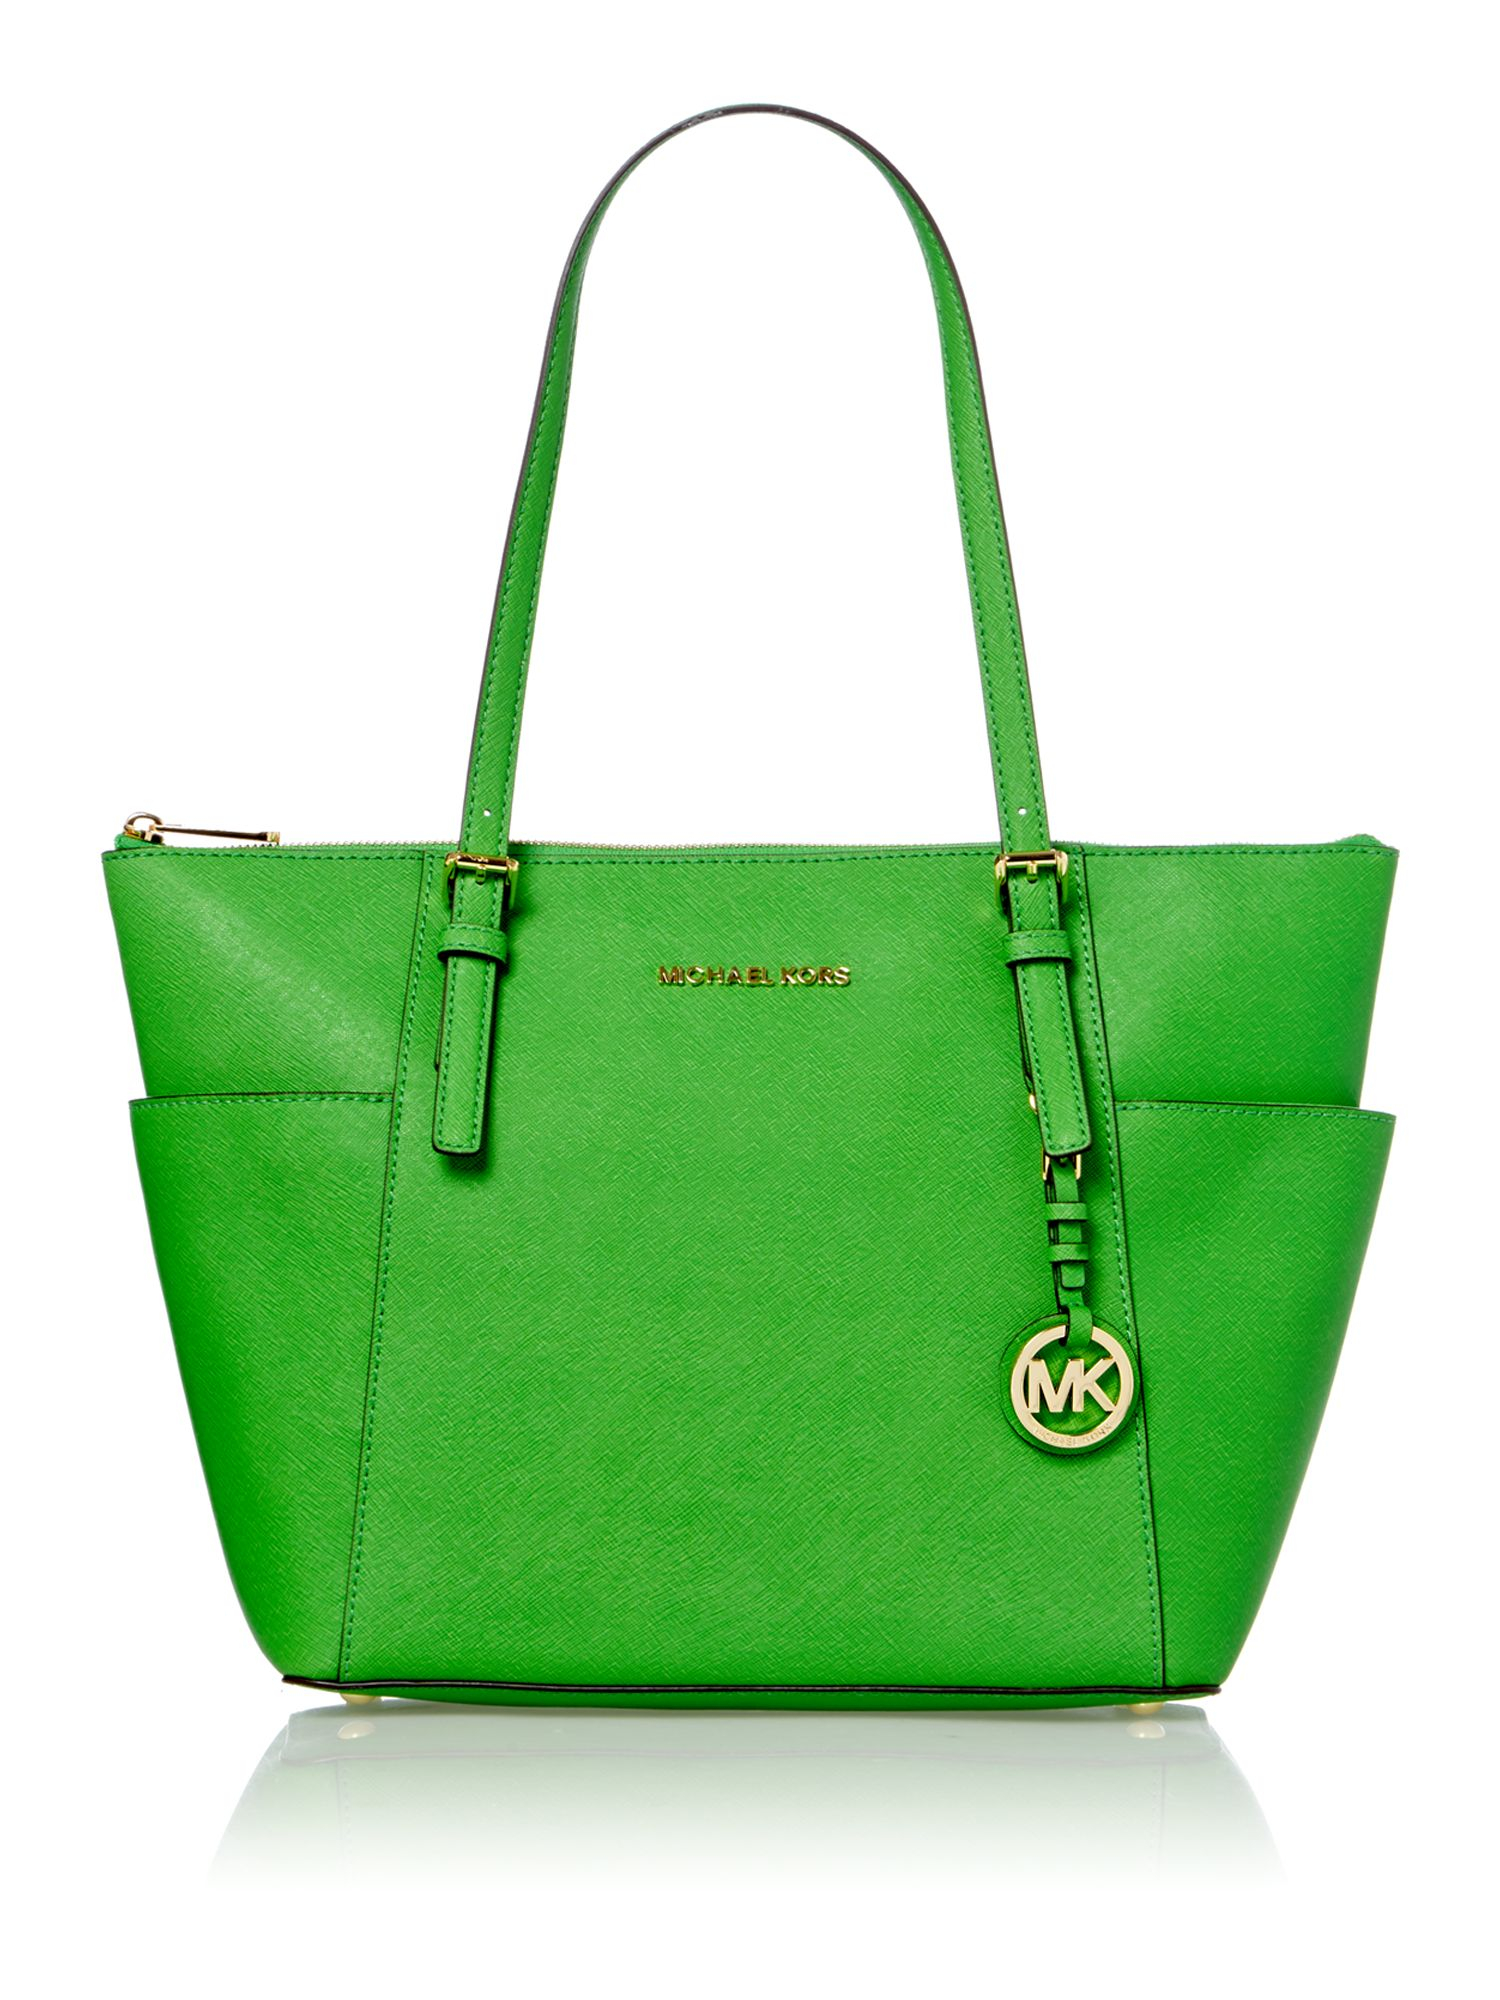 Michael Kors Jet Set Travel Small Green Tote Bag in Green | Lyst